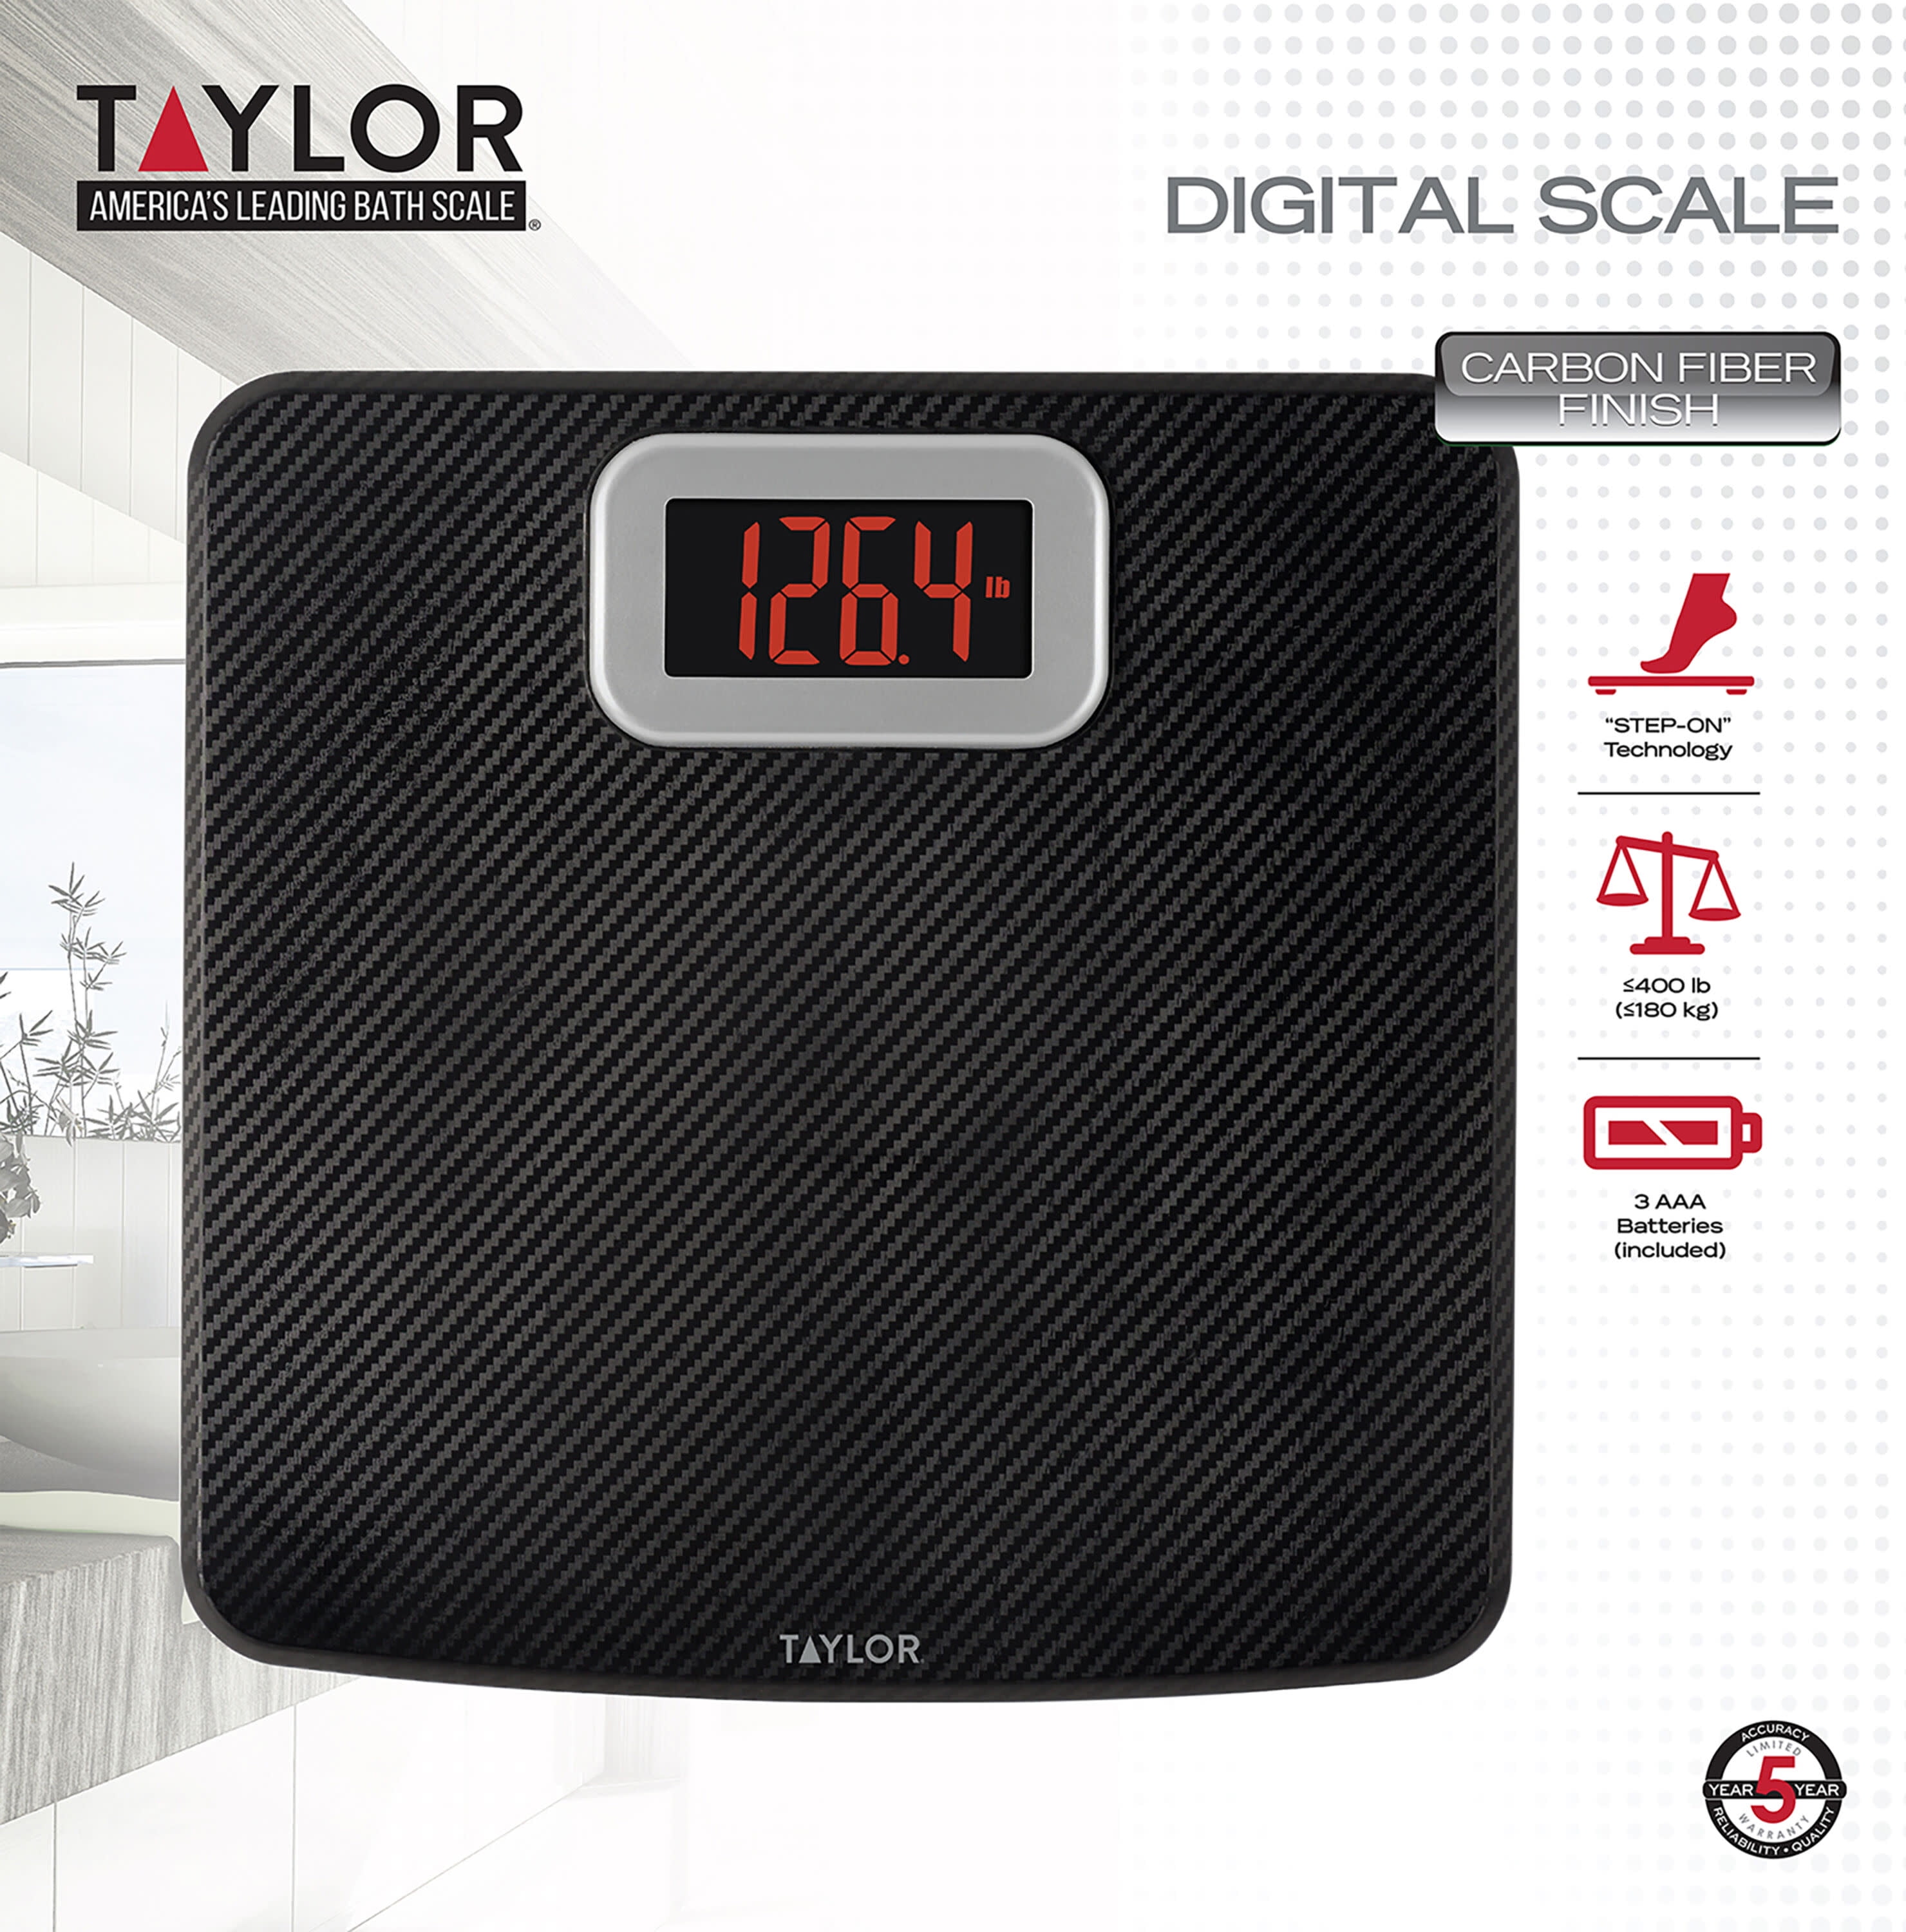 Taylor Precision Products Taylor Digital Bathroom Scale with Carbon Fiber Finish 